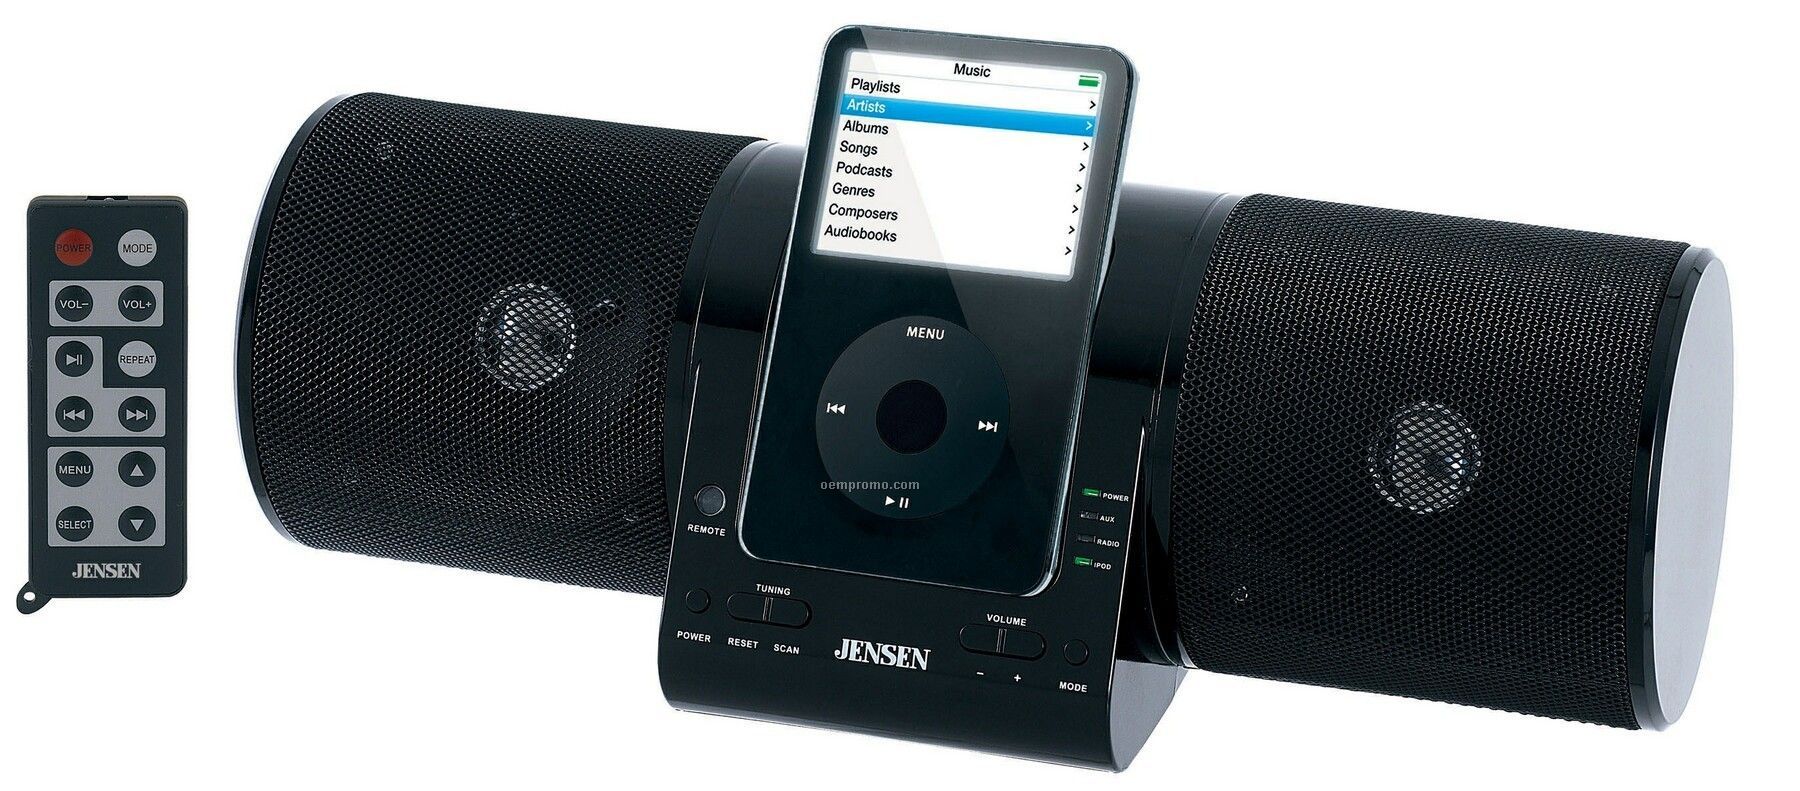 Docking Station W/ FM Tuner And Built-in Speakers For Ipod